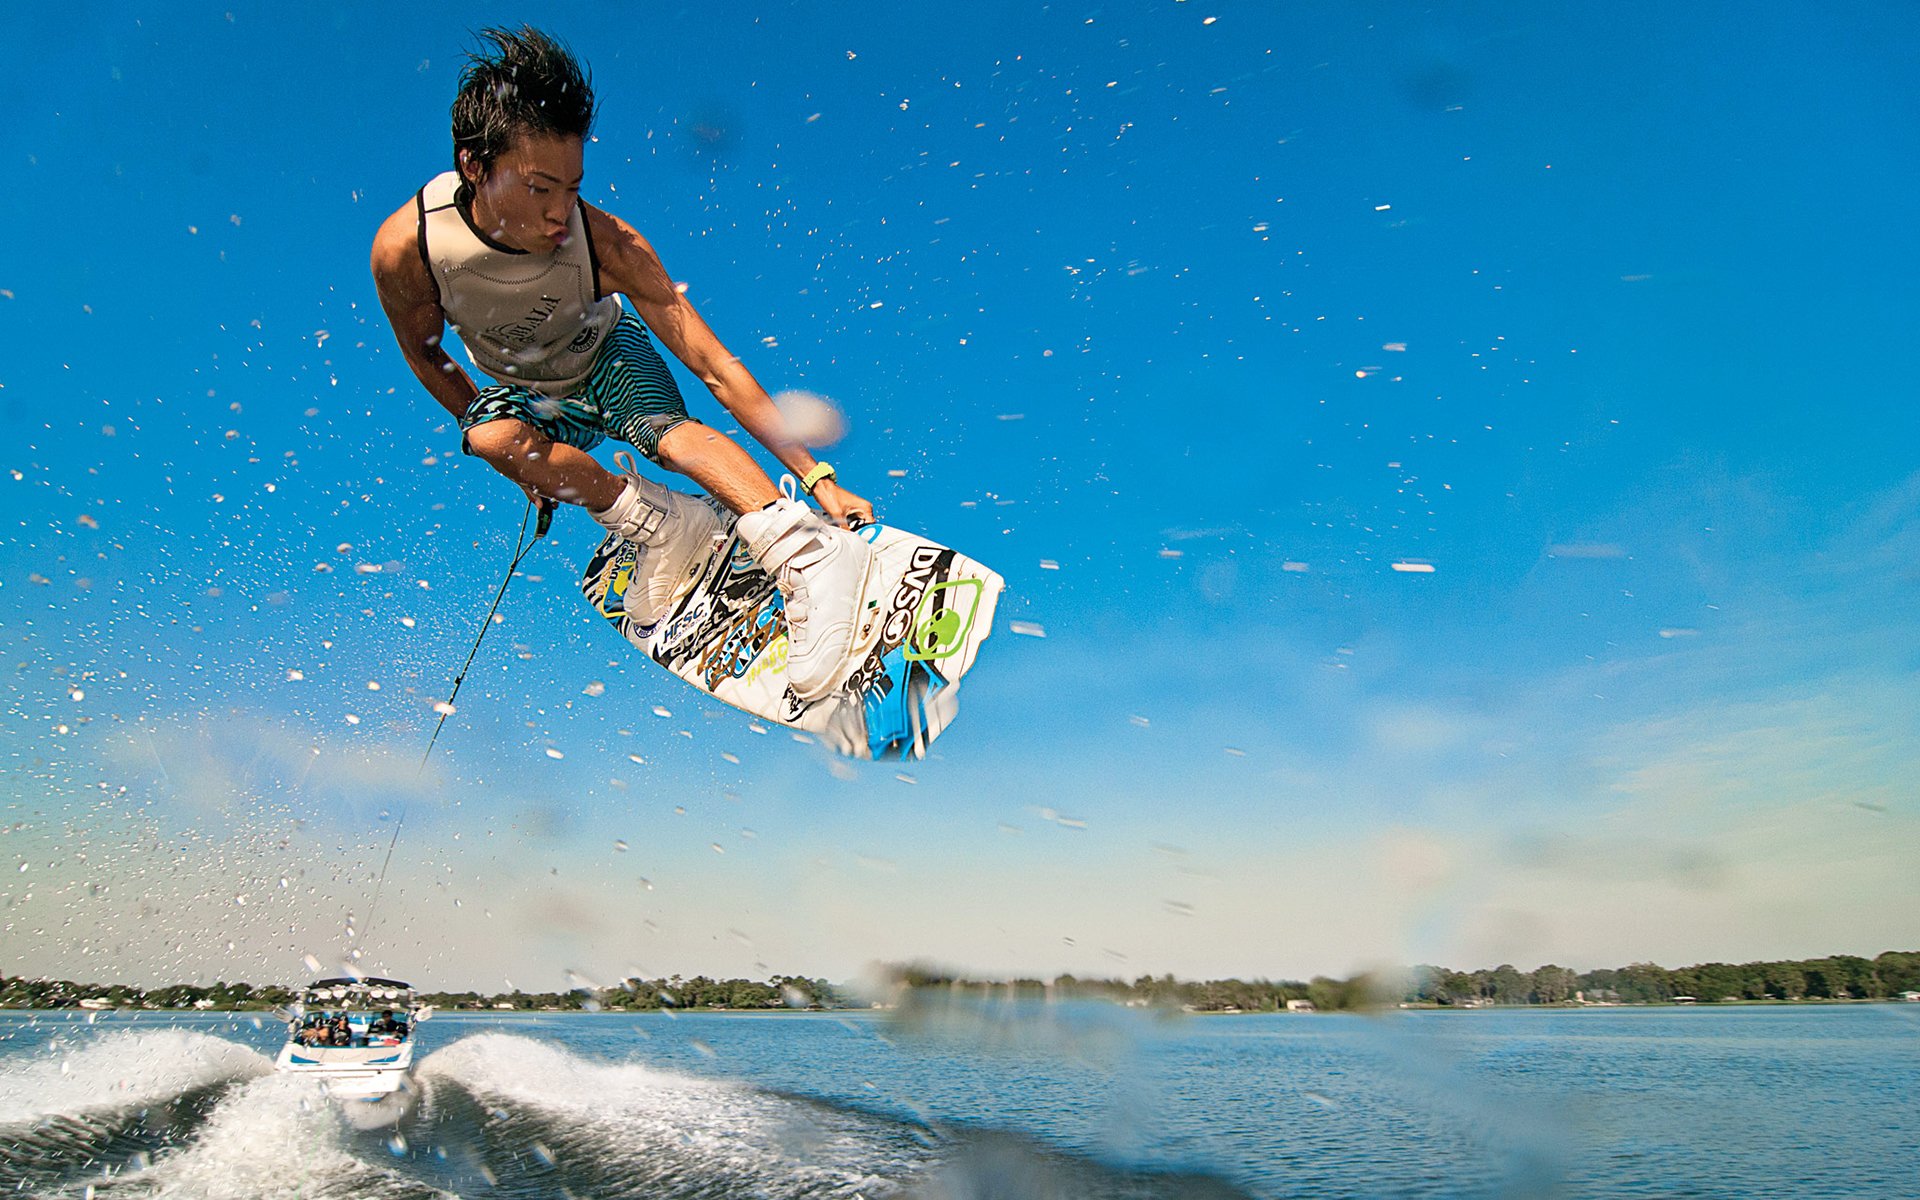 Wakeboard Wallpapers